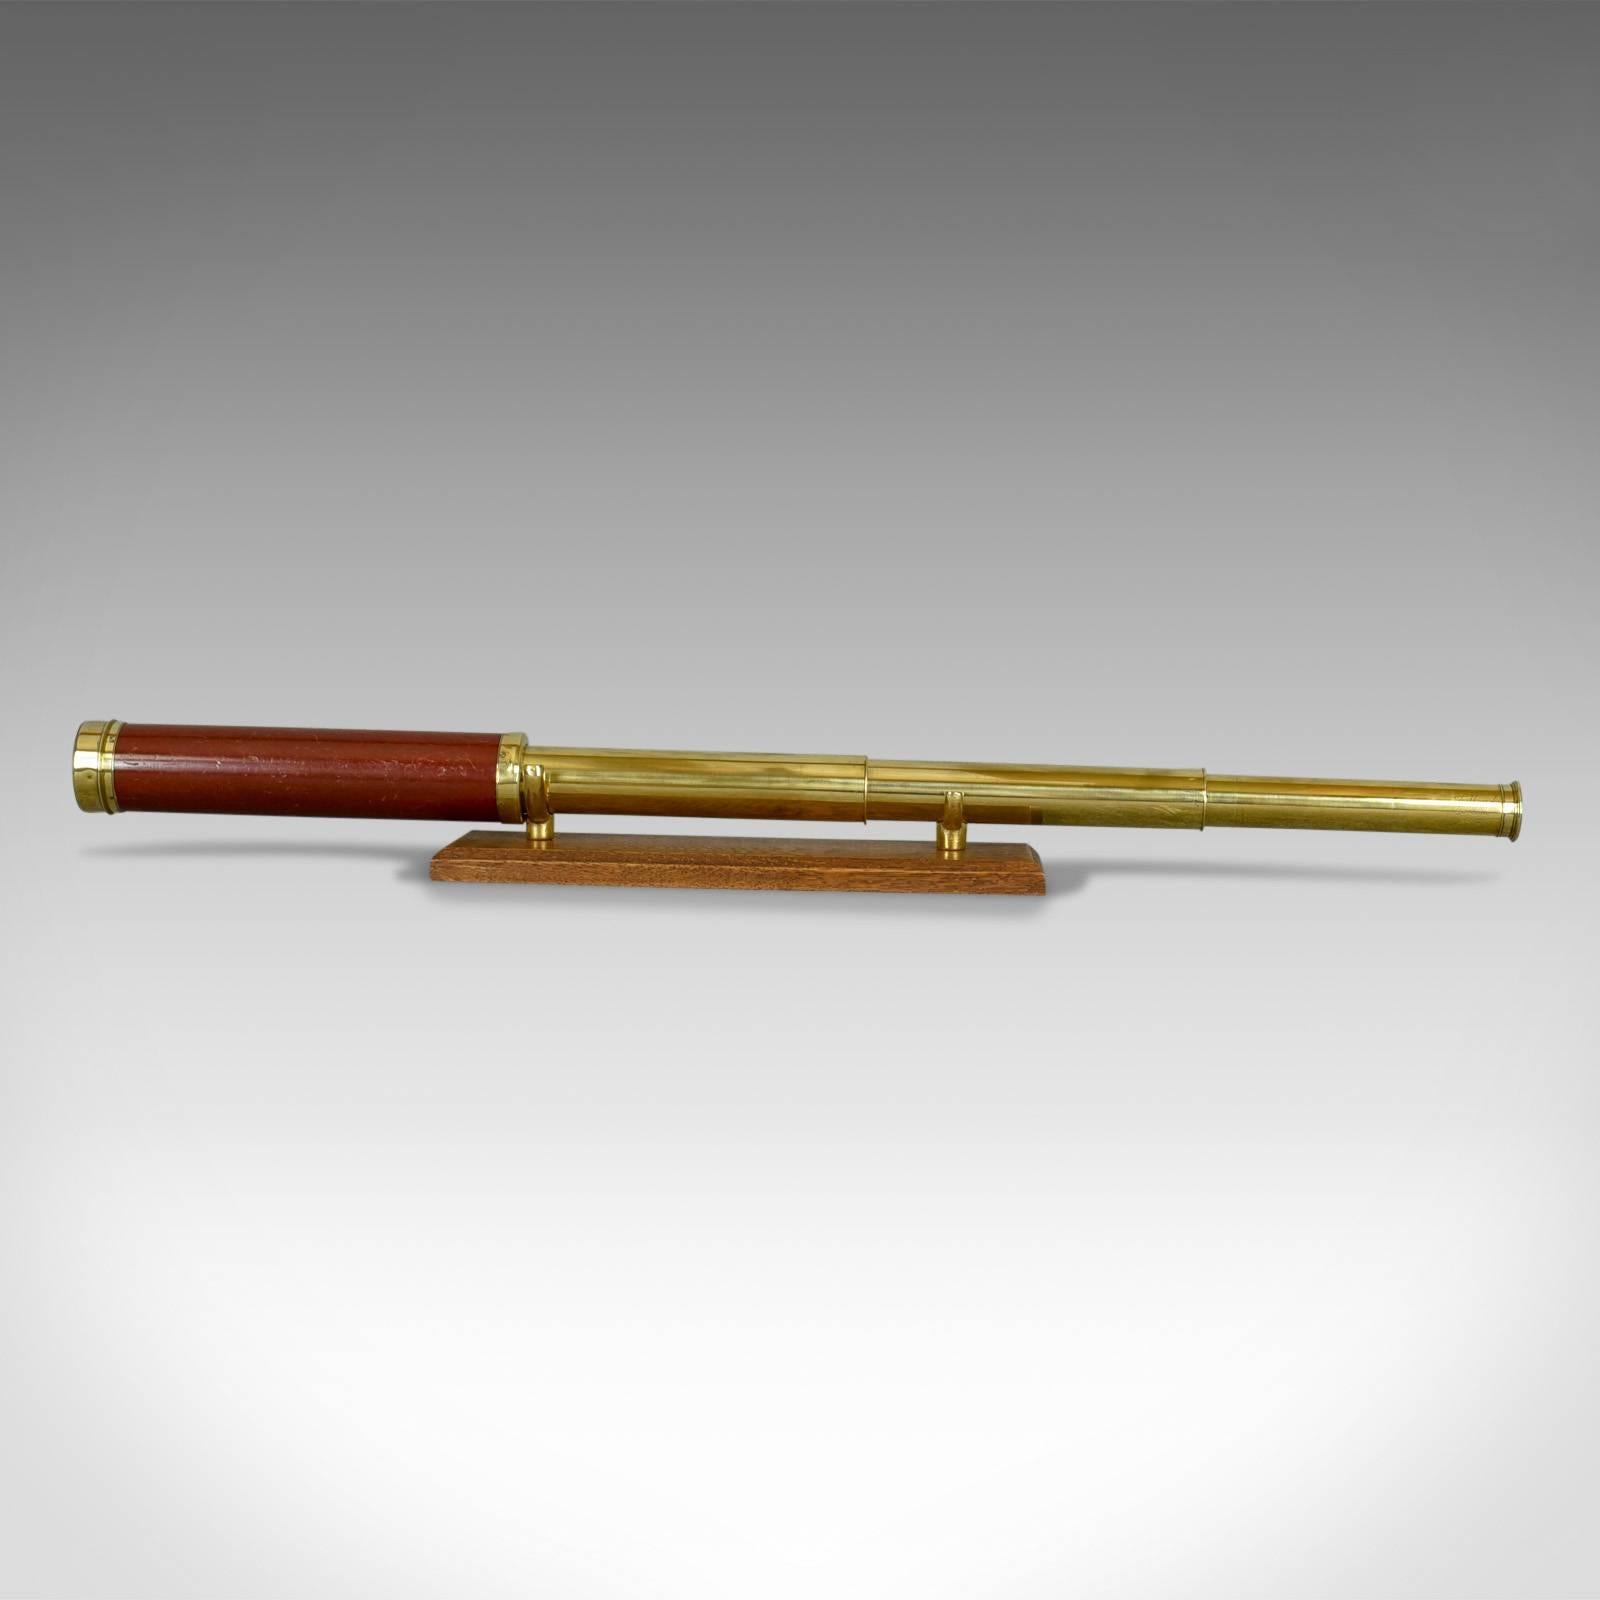 This is an antique telescope, a three draw terrestrial achromatic refractor. An English Georgian piece by Dollond dating to circa 1800.

Perfect for bird watching, landscape appreciation, wildlife, or maritime observation. Equally suitable for